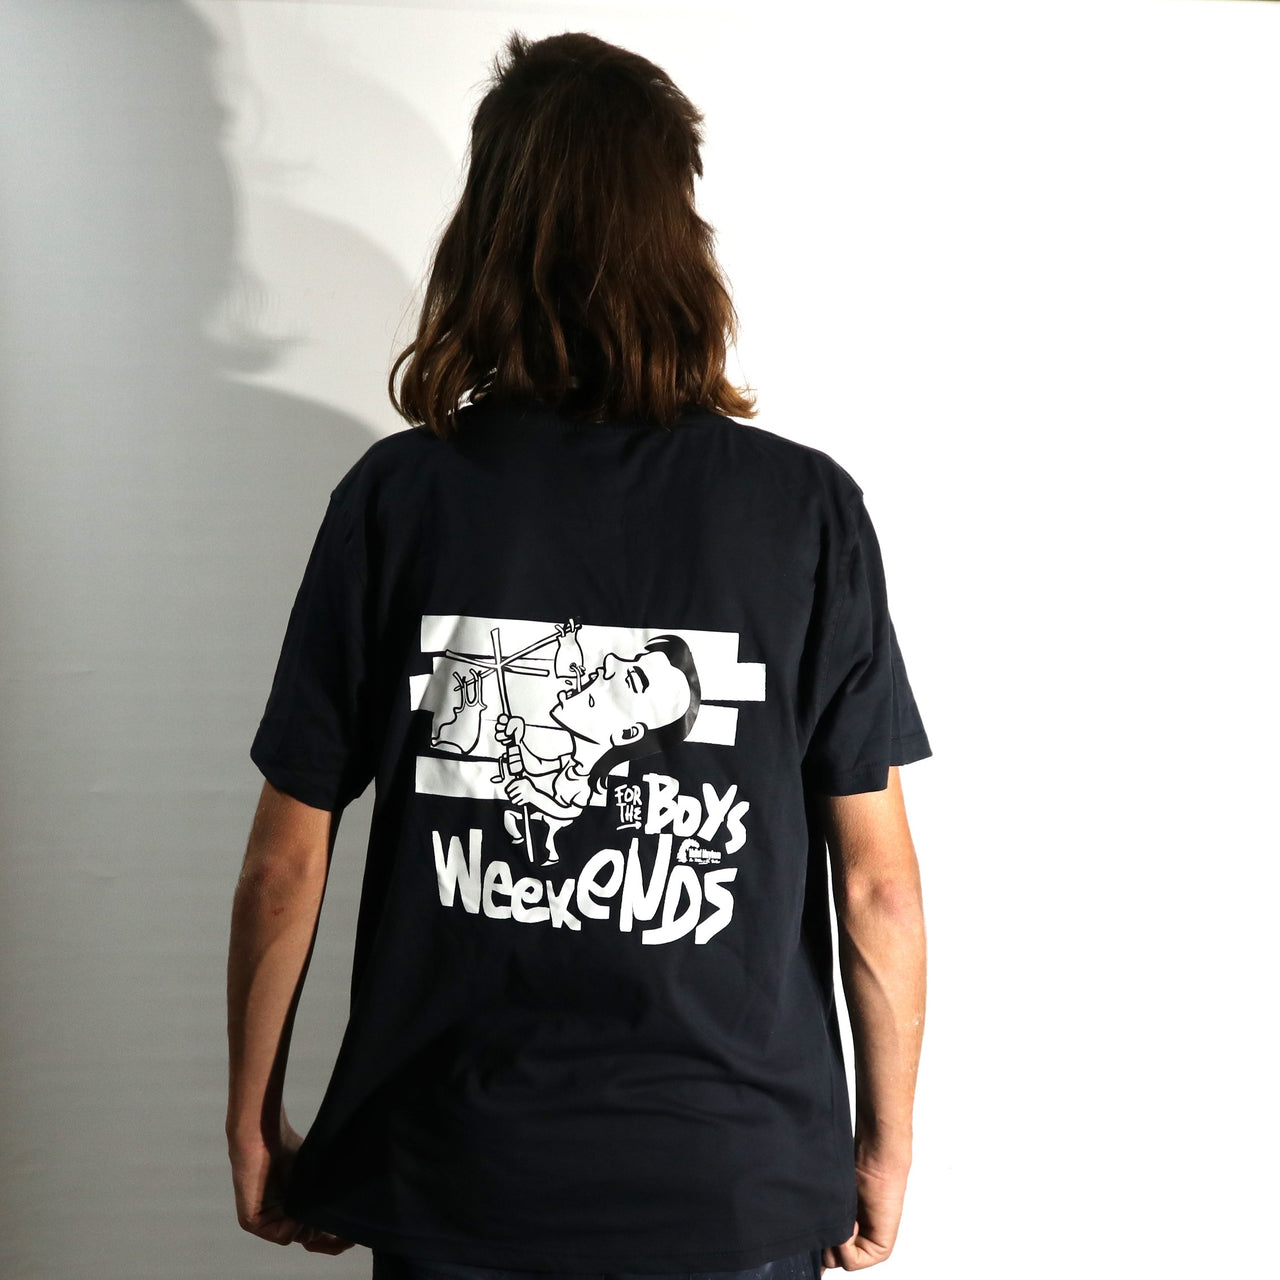 Weekends for the boys- Clothesline (t-shirt)